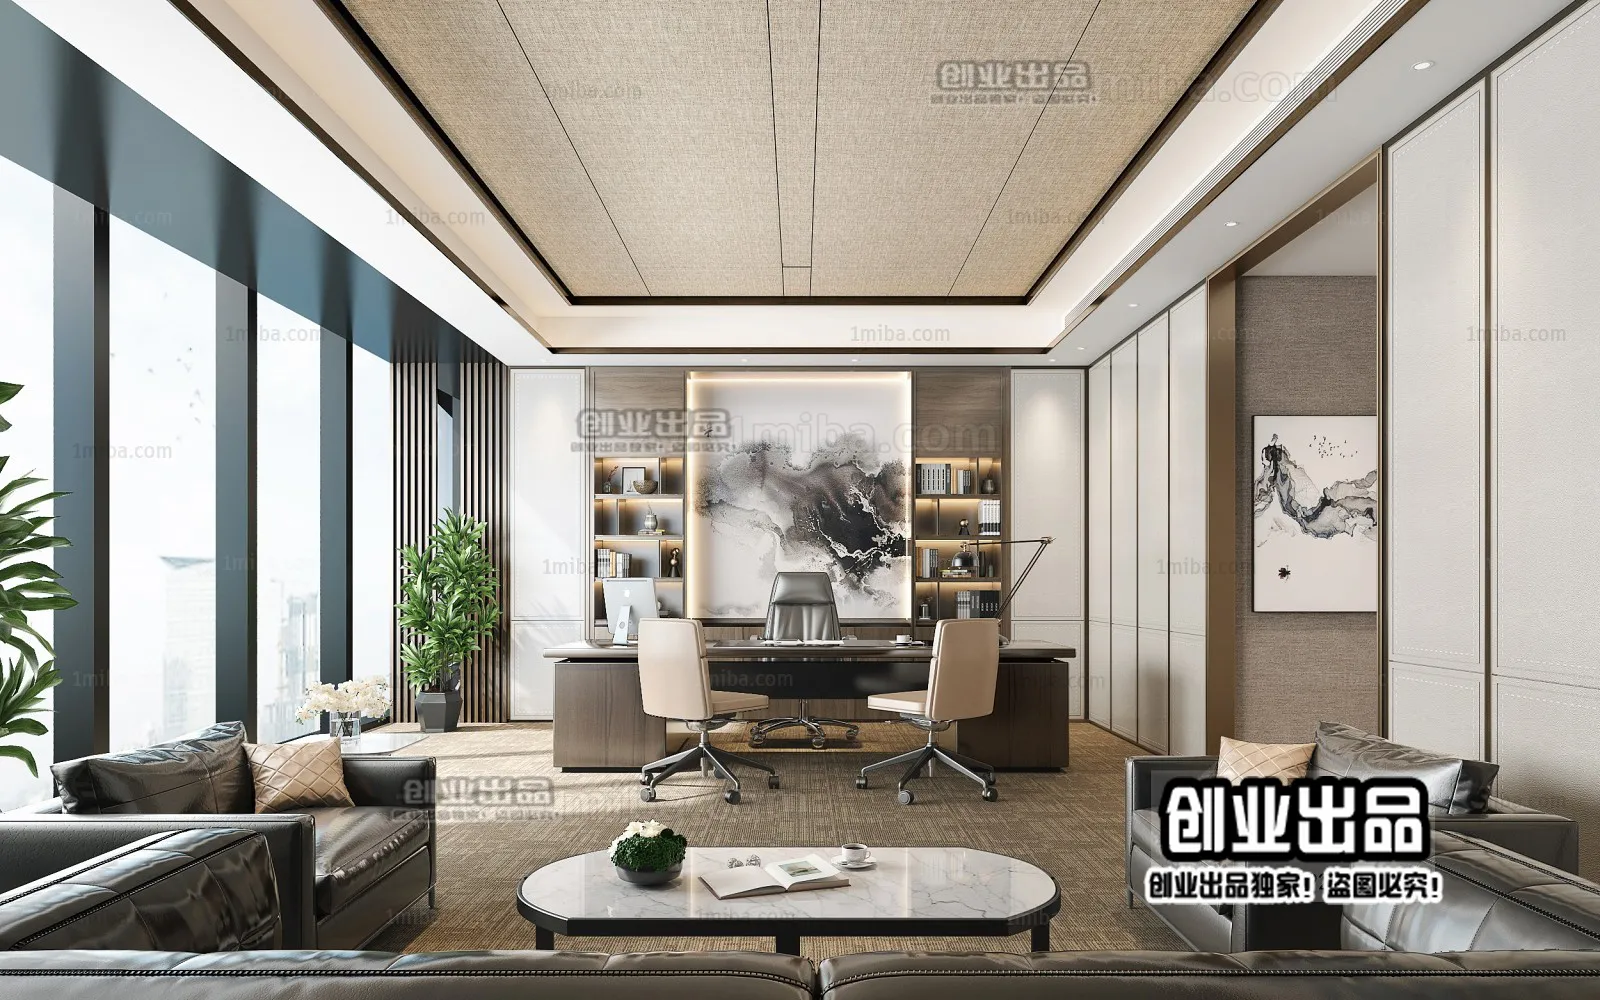 3D OFFICE INTERIOR (VRAY) – MANAGER ROOM 3D SCENES – 019